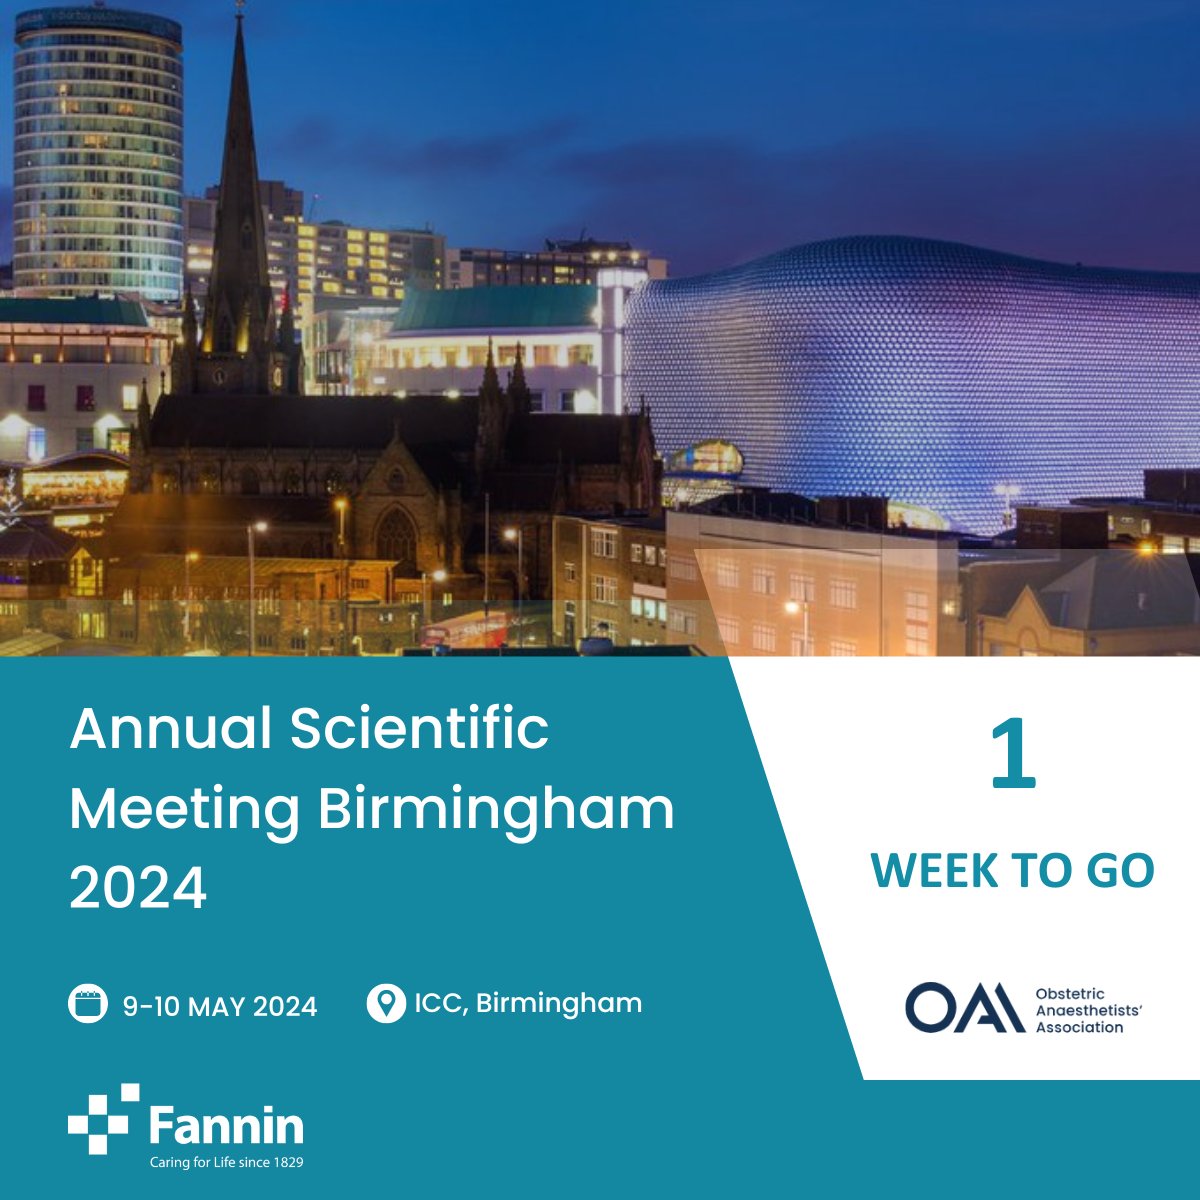 ⏰Only 1 week left until OAA Annual Scientific Meeting 2024! Dive into 2 days of obstetric #anaesthesia education with top speakers and engaging discussions. 

Don't miss out! 

#OAA24ASM #OBAnes #Anaesthesia #MedicalConference